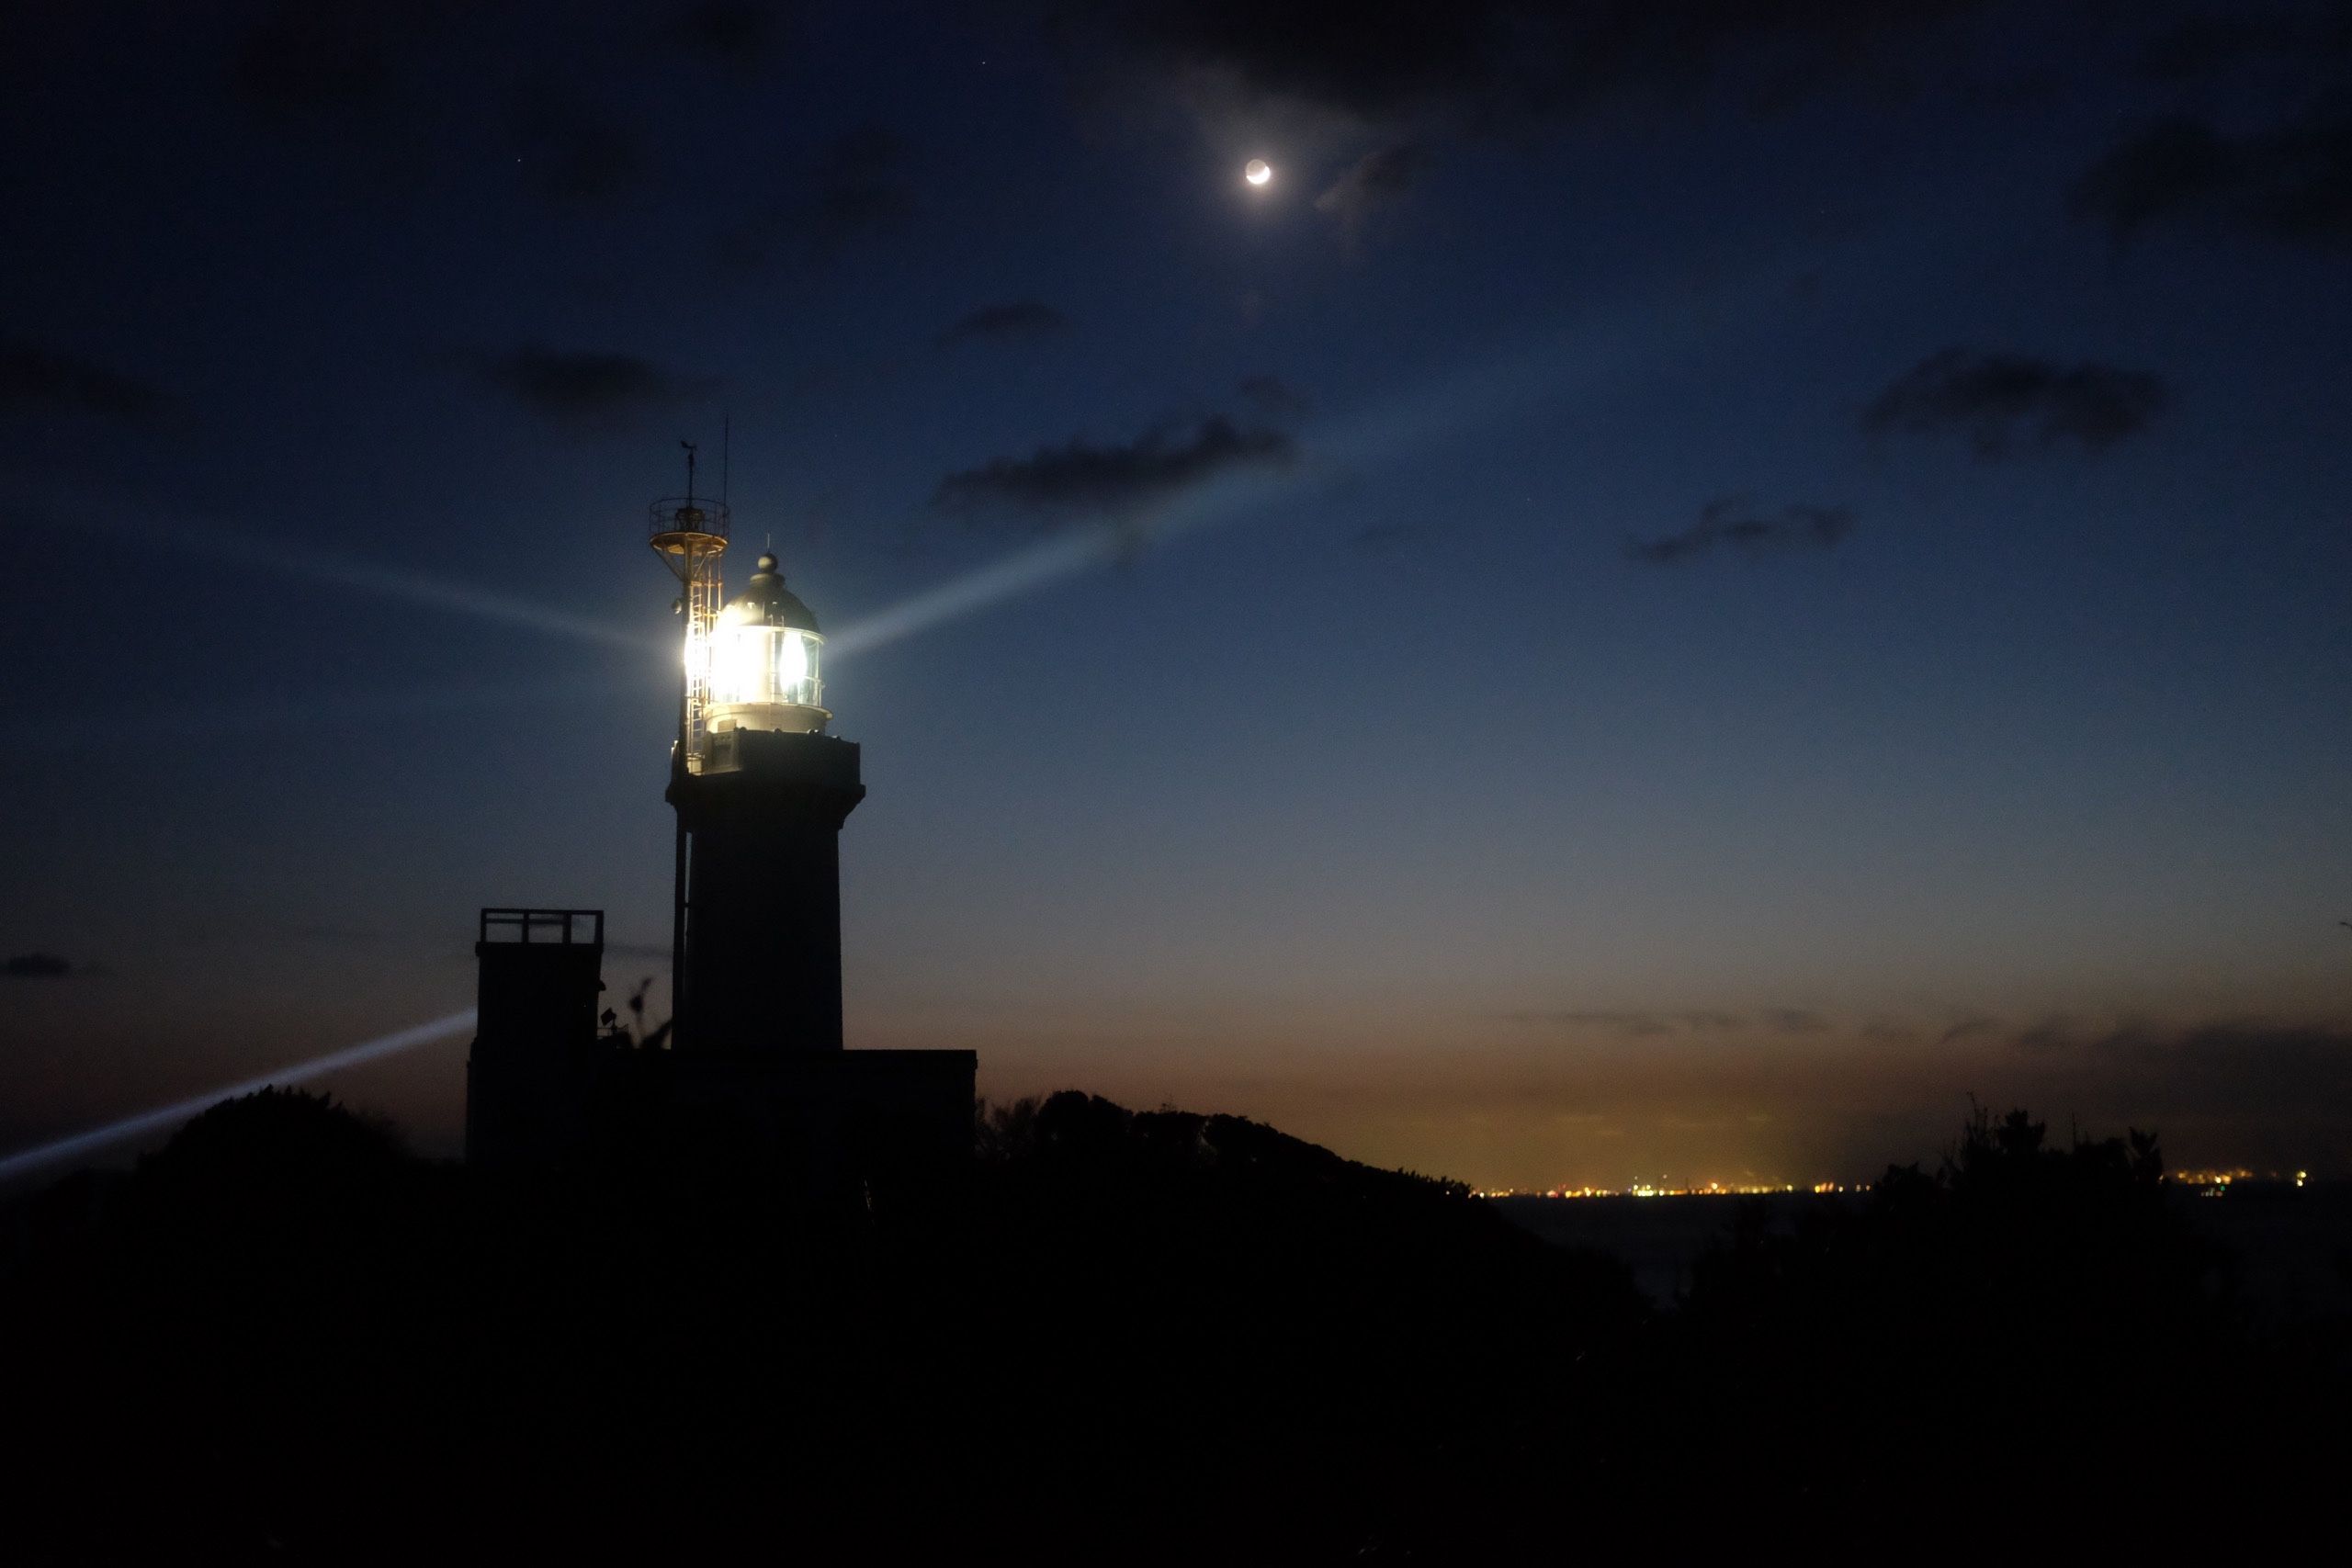 A lighthouse casts rays into the night sky. The lights of a city are visible on the horizon behind it.